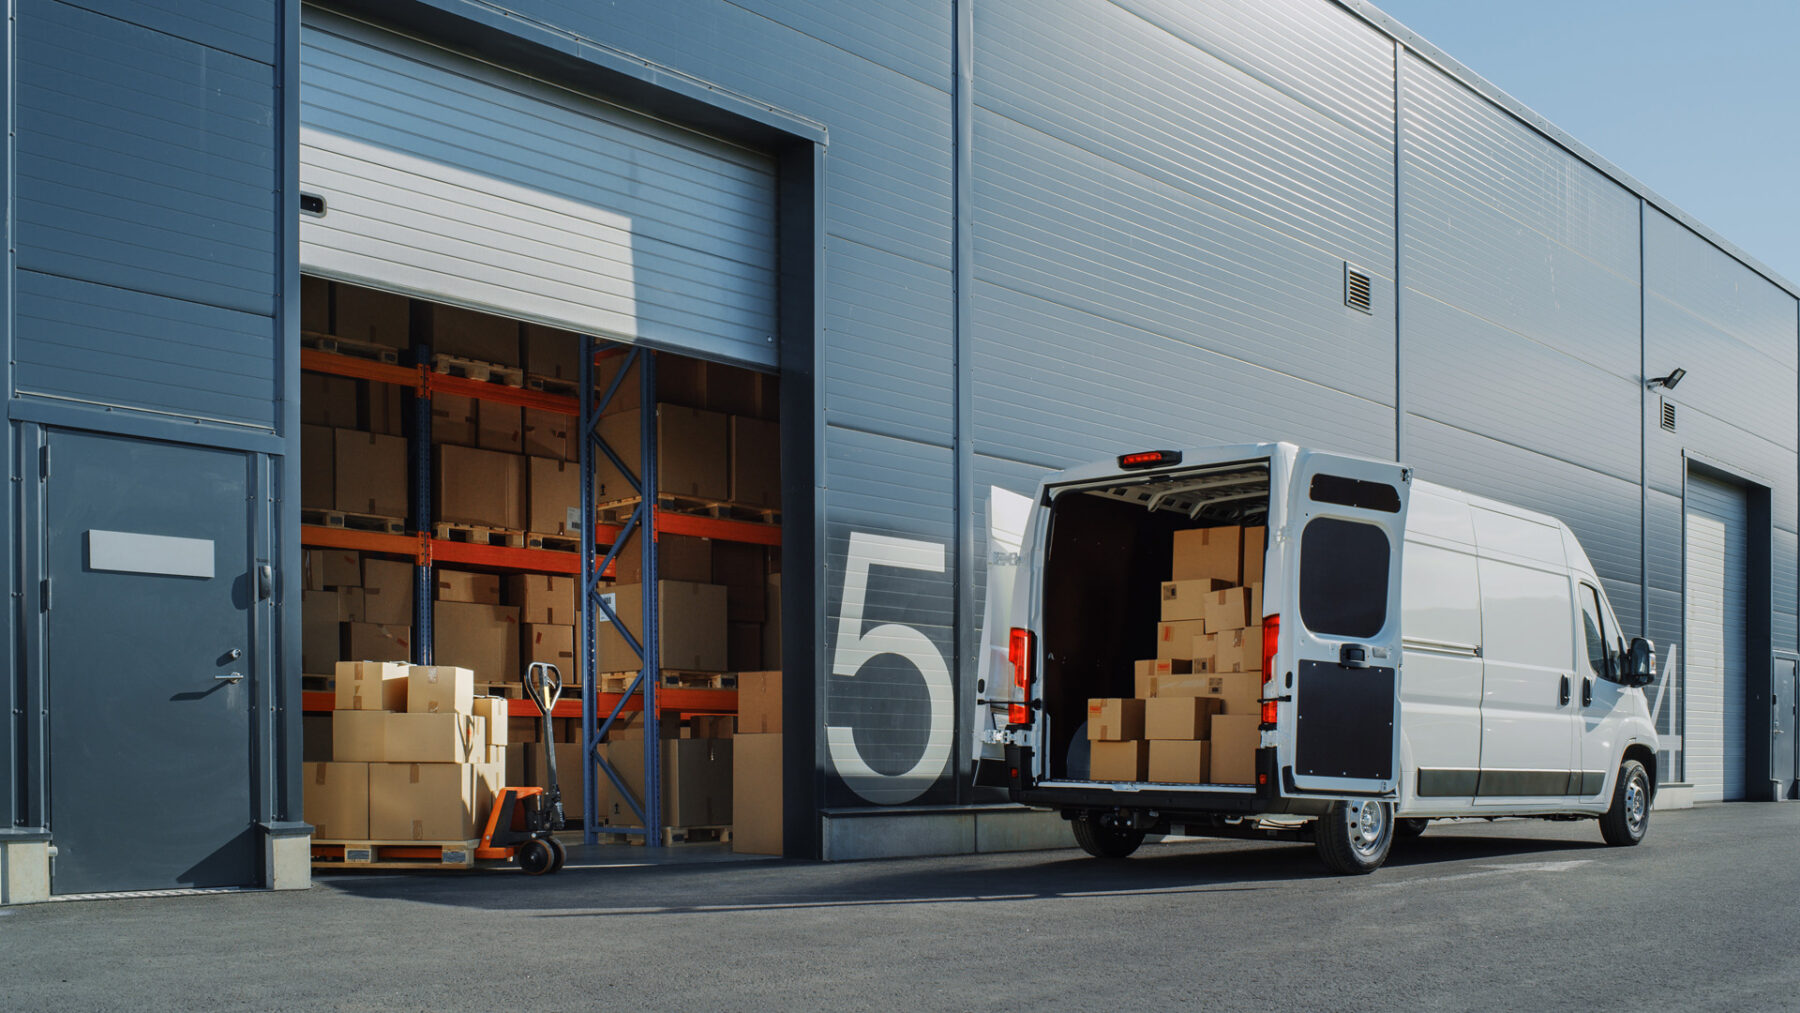 Outside of Logistics Warehouse with Open Door, Delivery Van Load